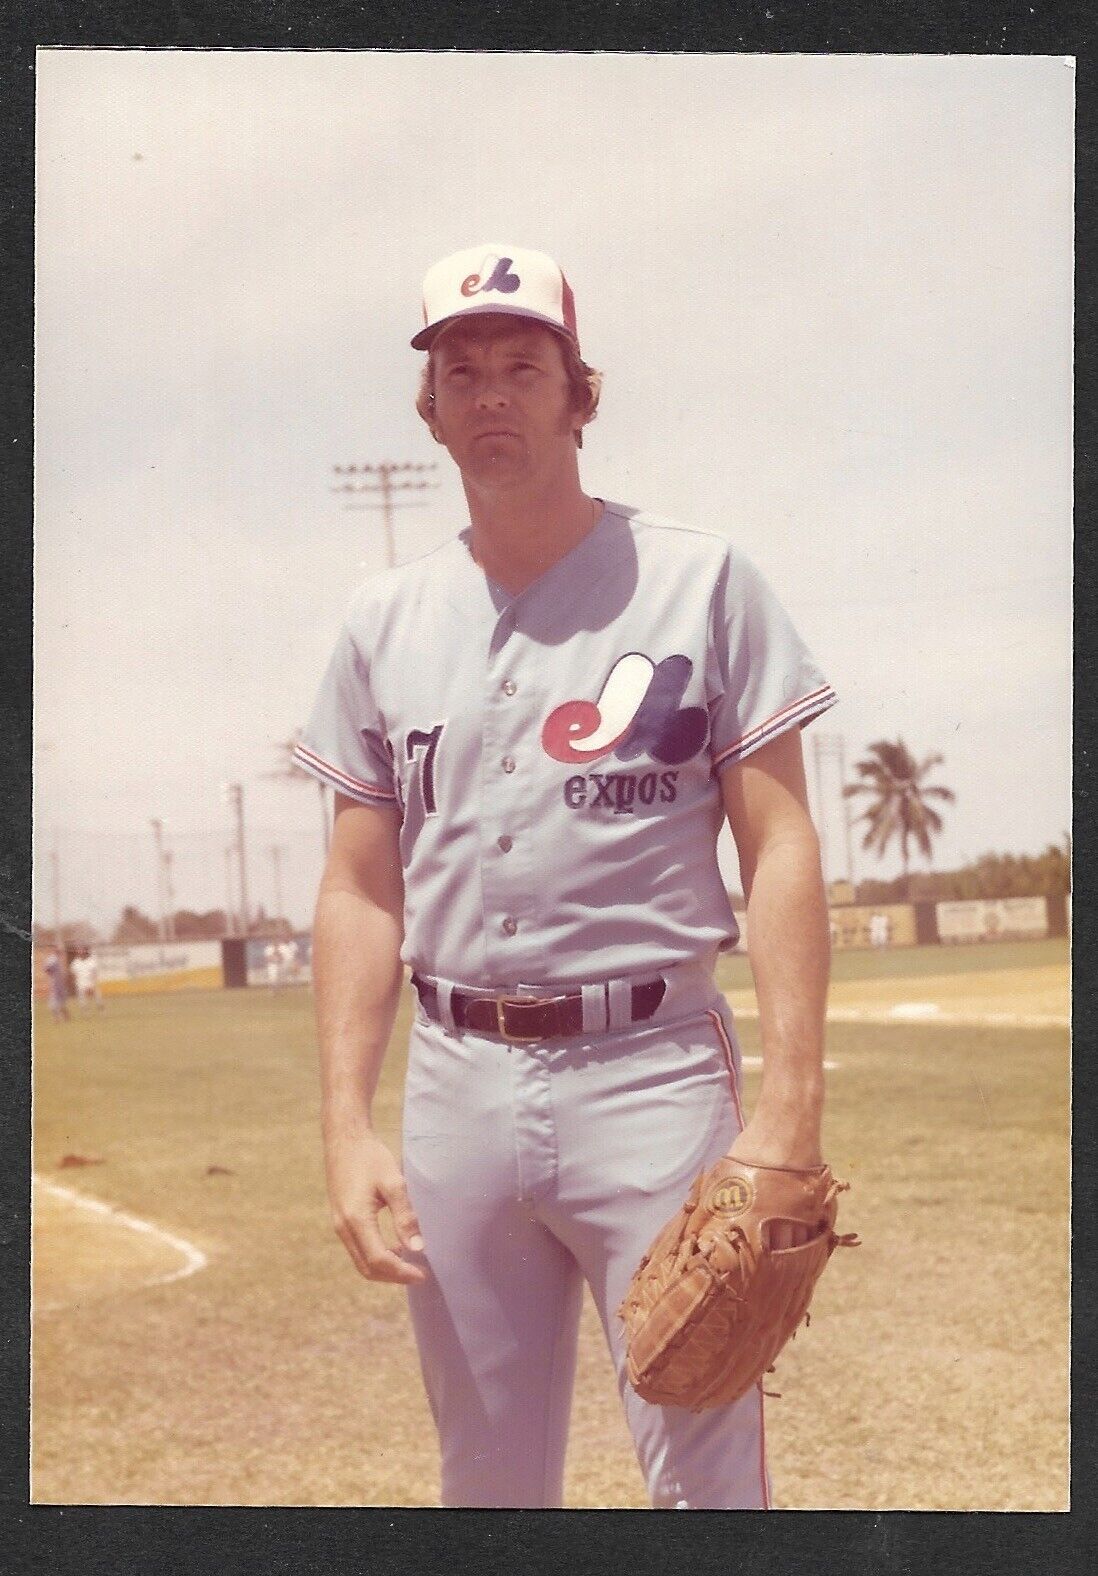 1976 Dale Murray  EXPOS  UNSIGNED  3-1/2 x 4-7/8  SNAPSHOT PHOTO POSTCARD #13